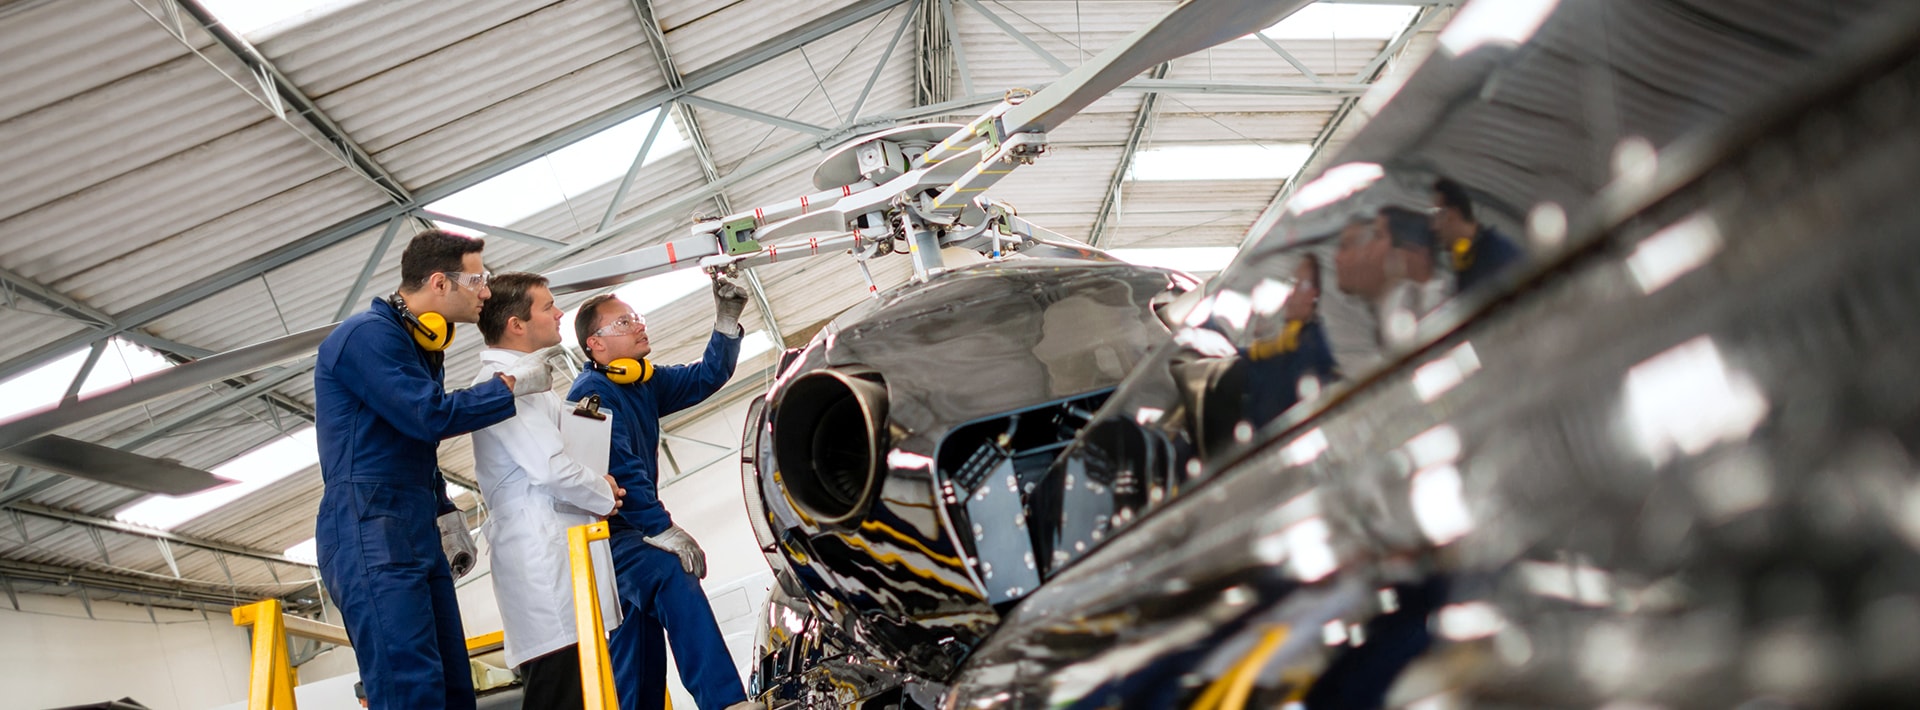 Rotor Blade Inspection with GOM solutions